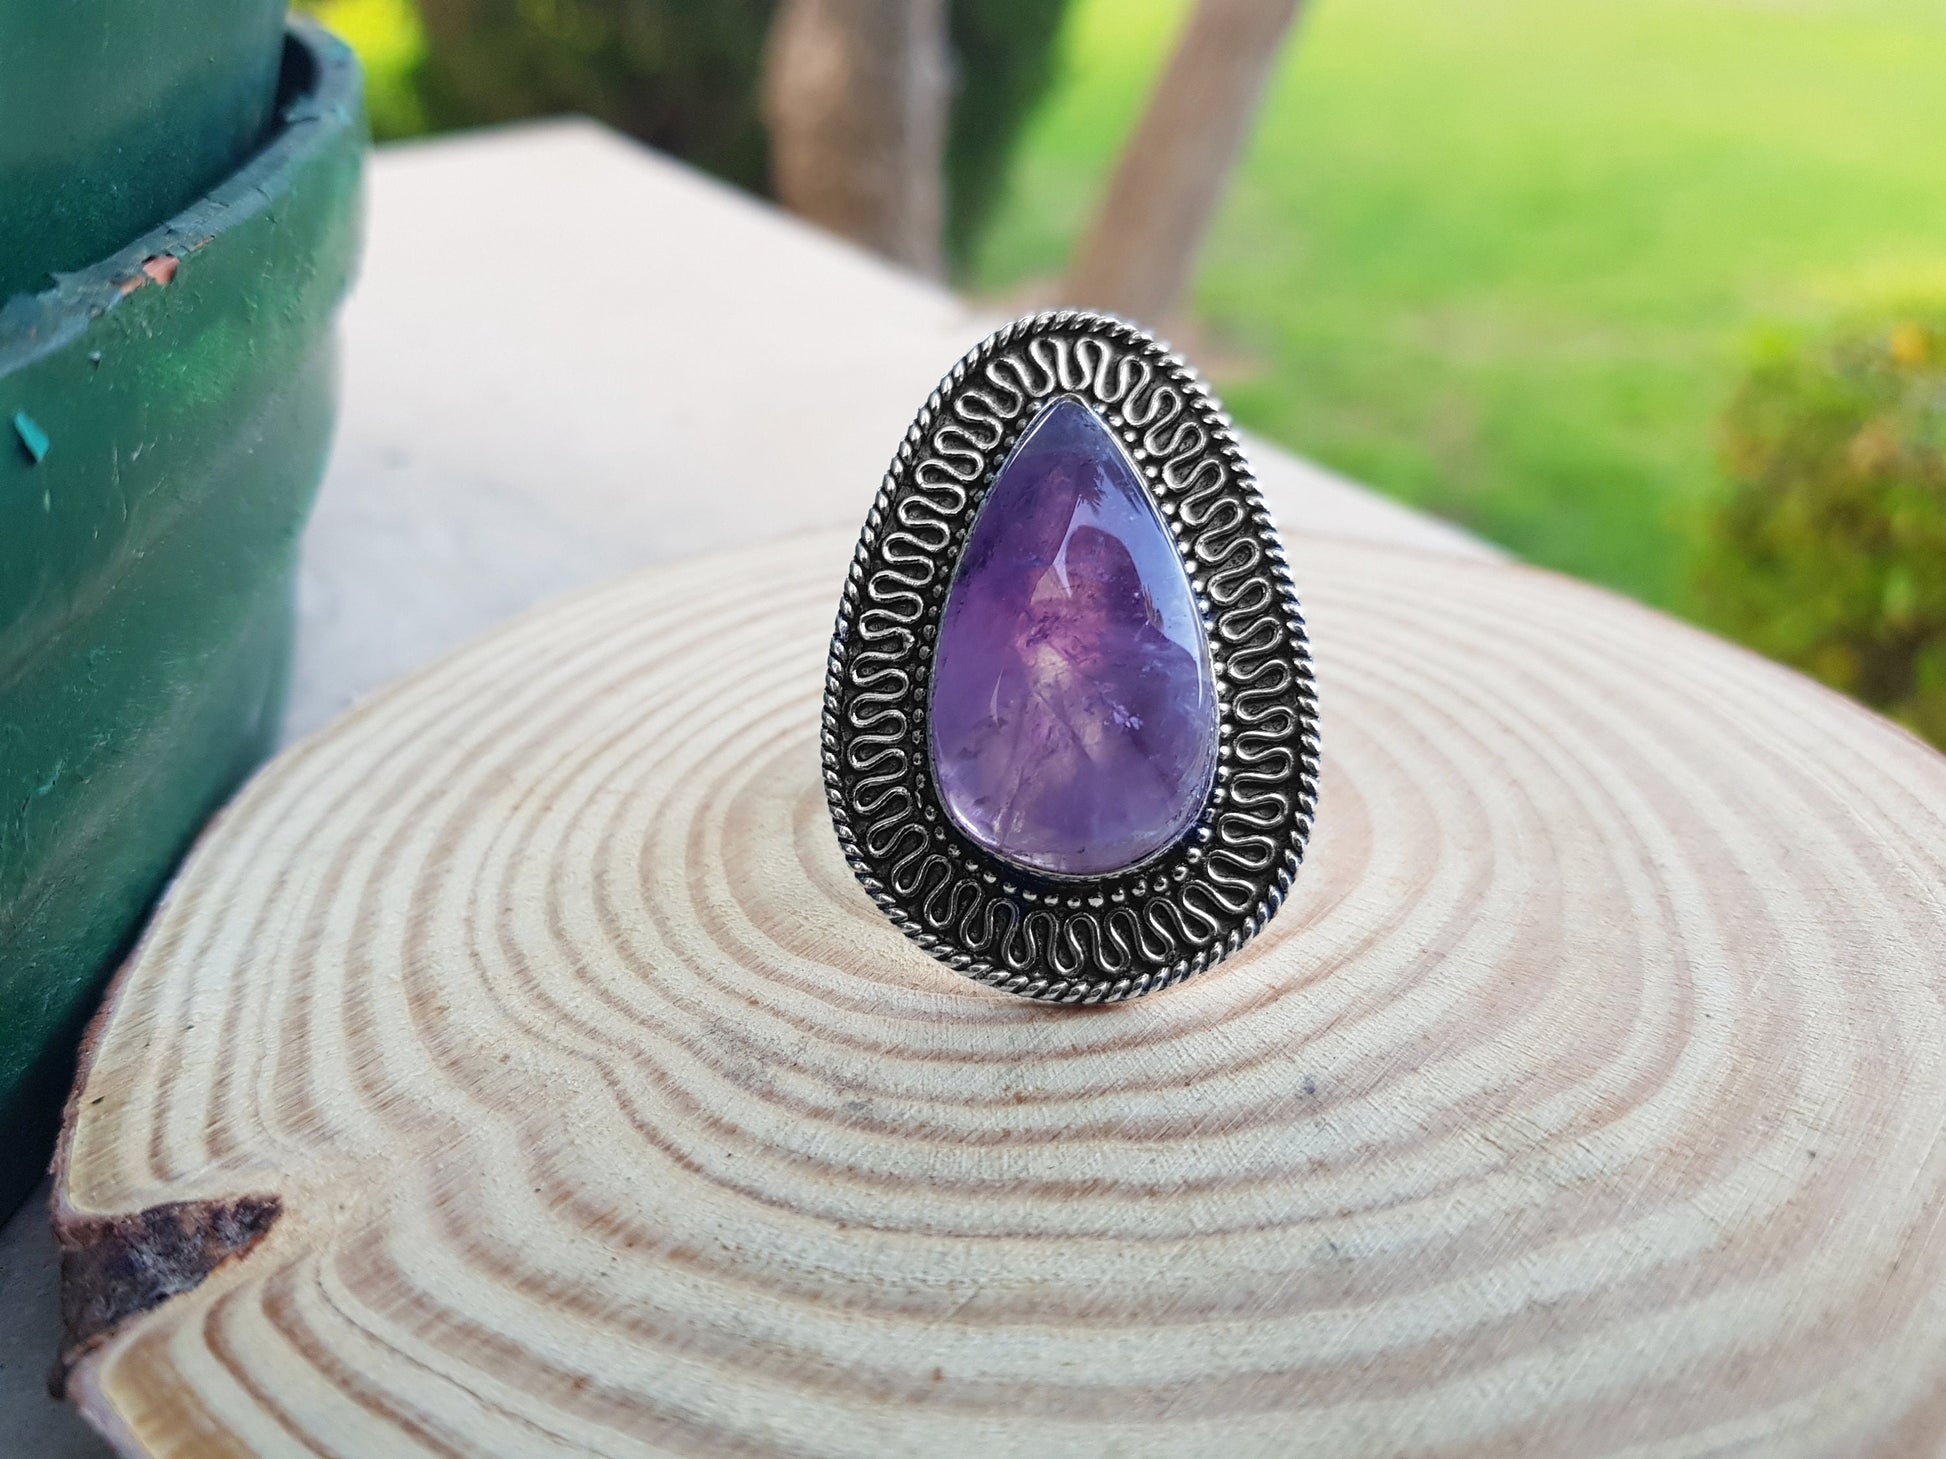 Natural Amethyst Ring Big Statement Ring Size US 8 Sterling Silver Gemstone Ring Boho Rings Unique Gift For Women One Of A Kind Jewelry